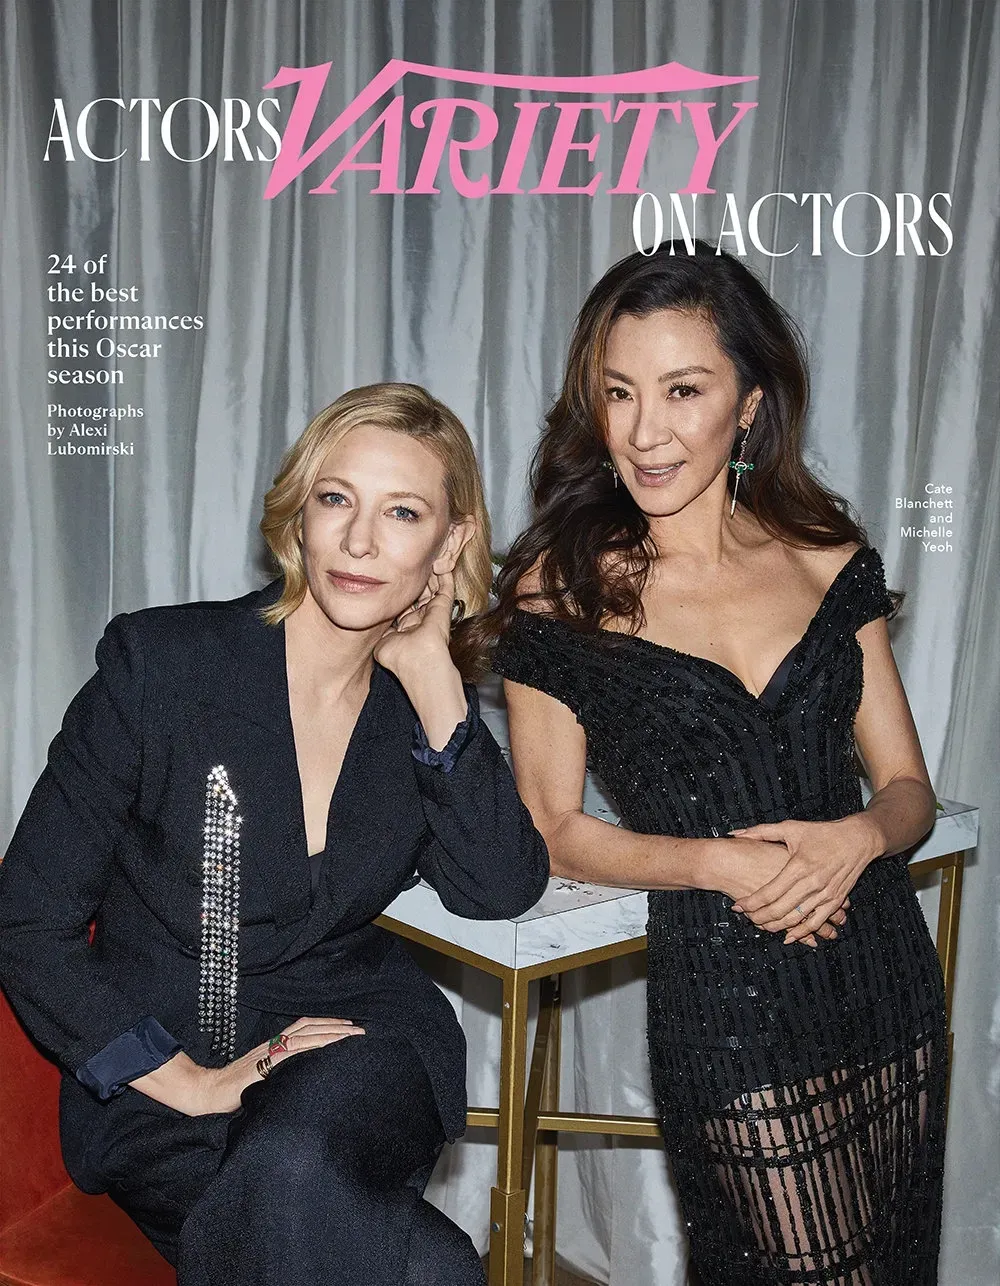 Cate Blanchett and Michelle Yeoh, 'Variety' Magazine 'Actors ON Actors' Photoshoot | FMV6